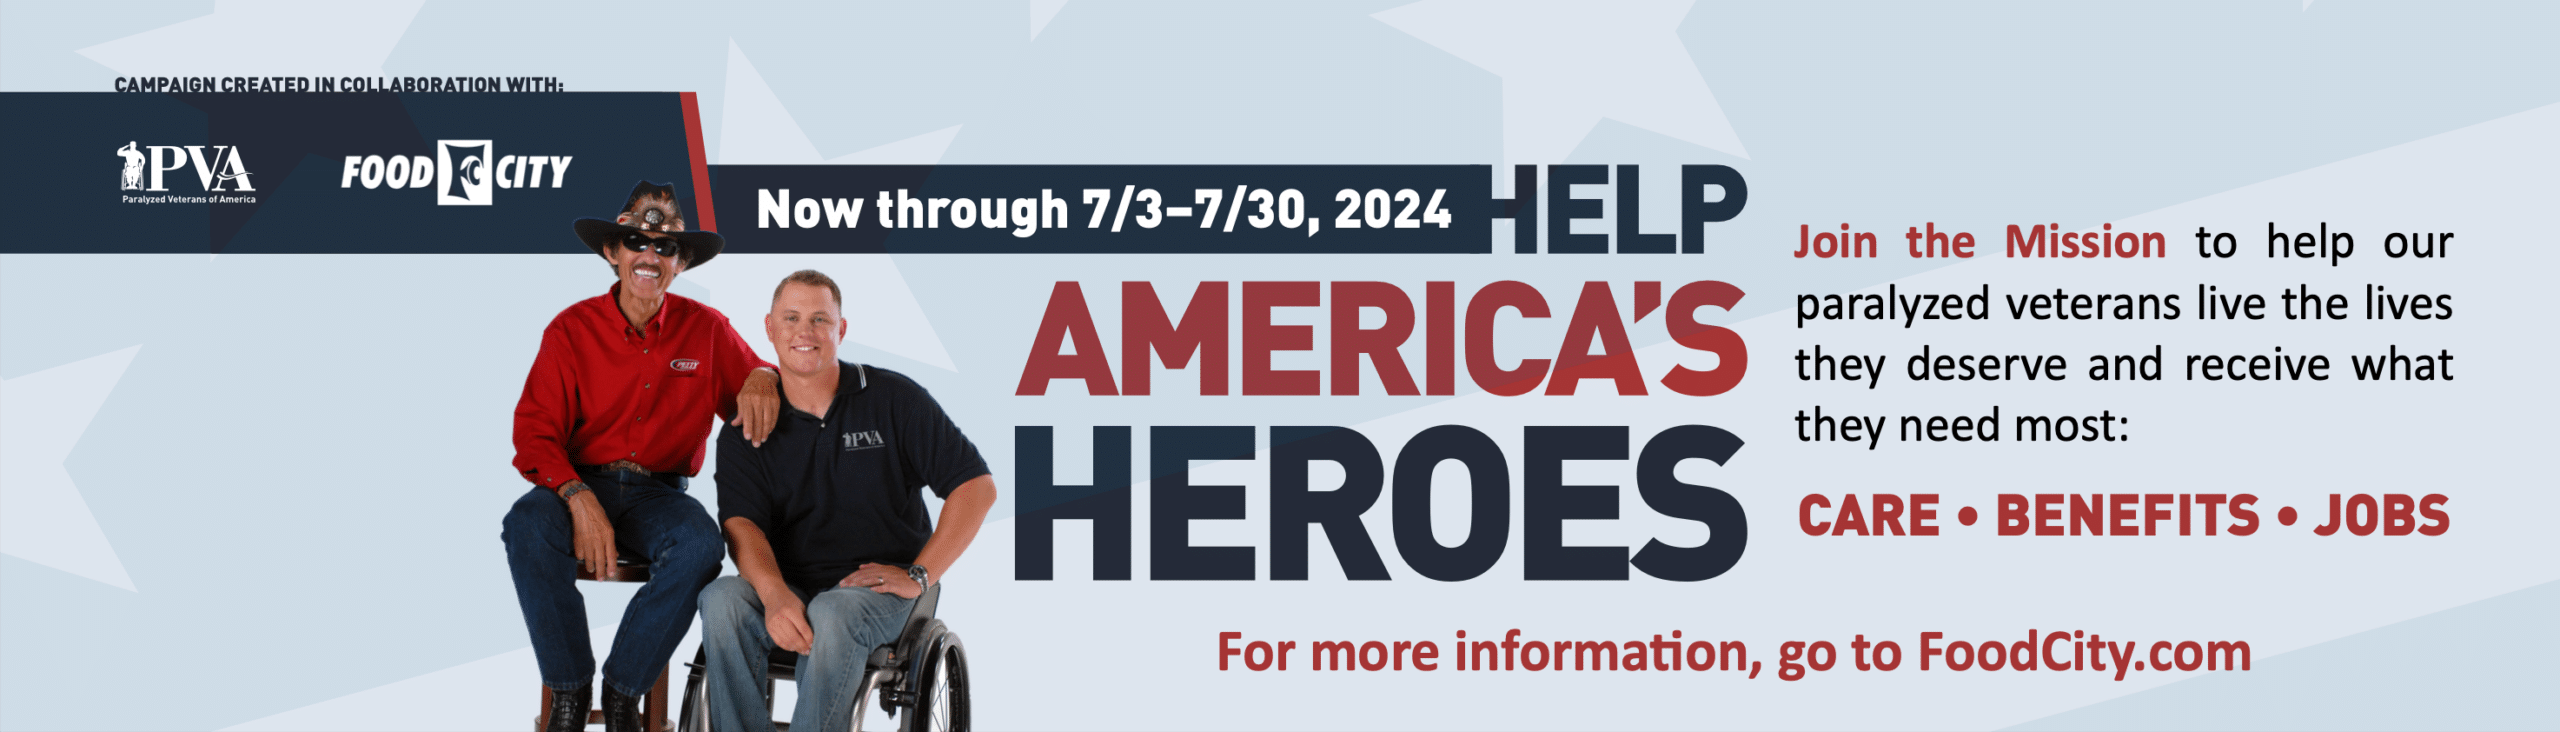 Banner promoting a campaign by PVA and Food City to support paralyzed veterans from 7/3-7/30, 2024. Text reads: "HELP AMERICA'S HEROES" and encourages joining the mission to provide care, benefits, and jobs for veterans. For more info, visit FoodCity.com.